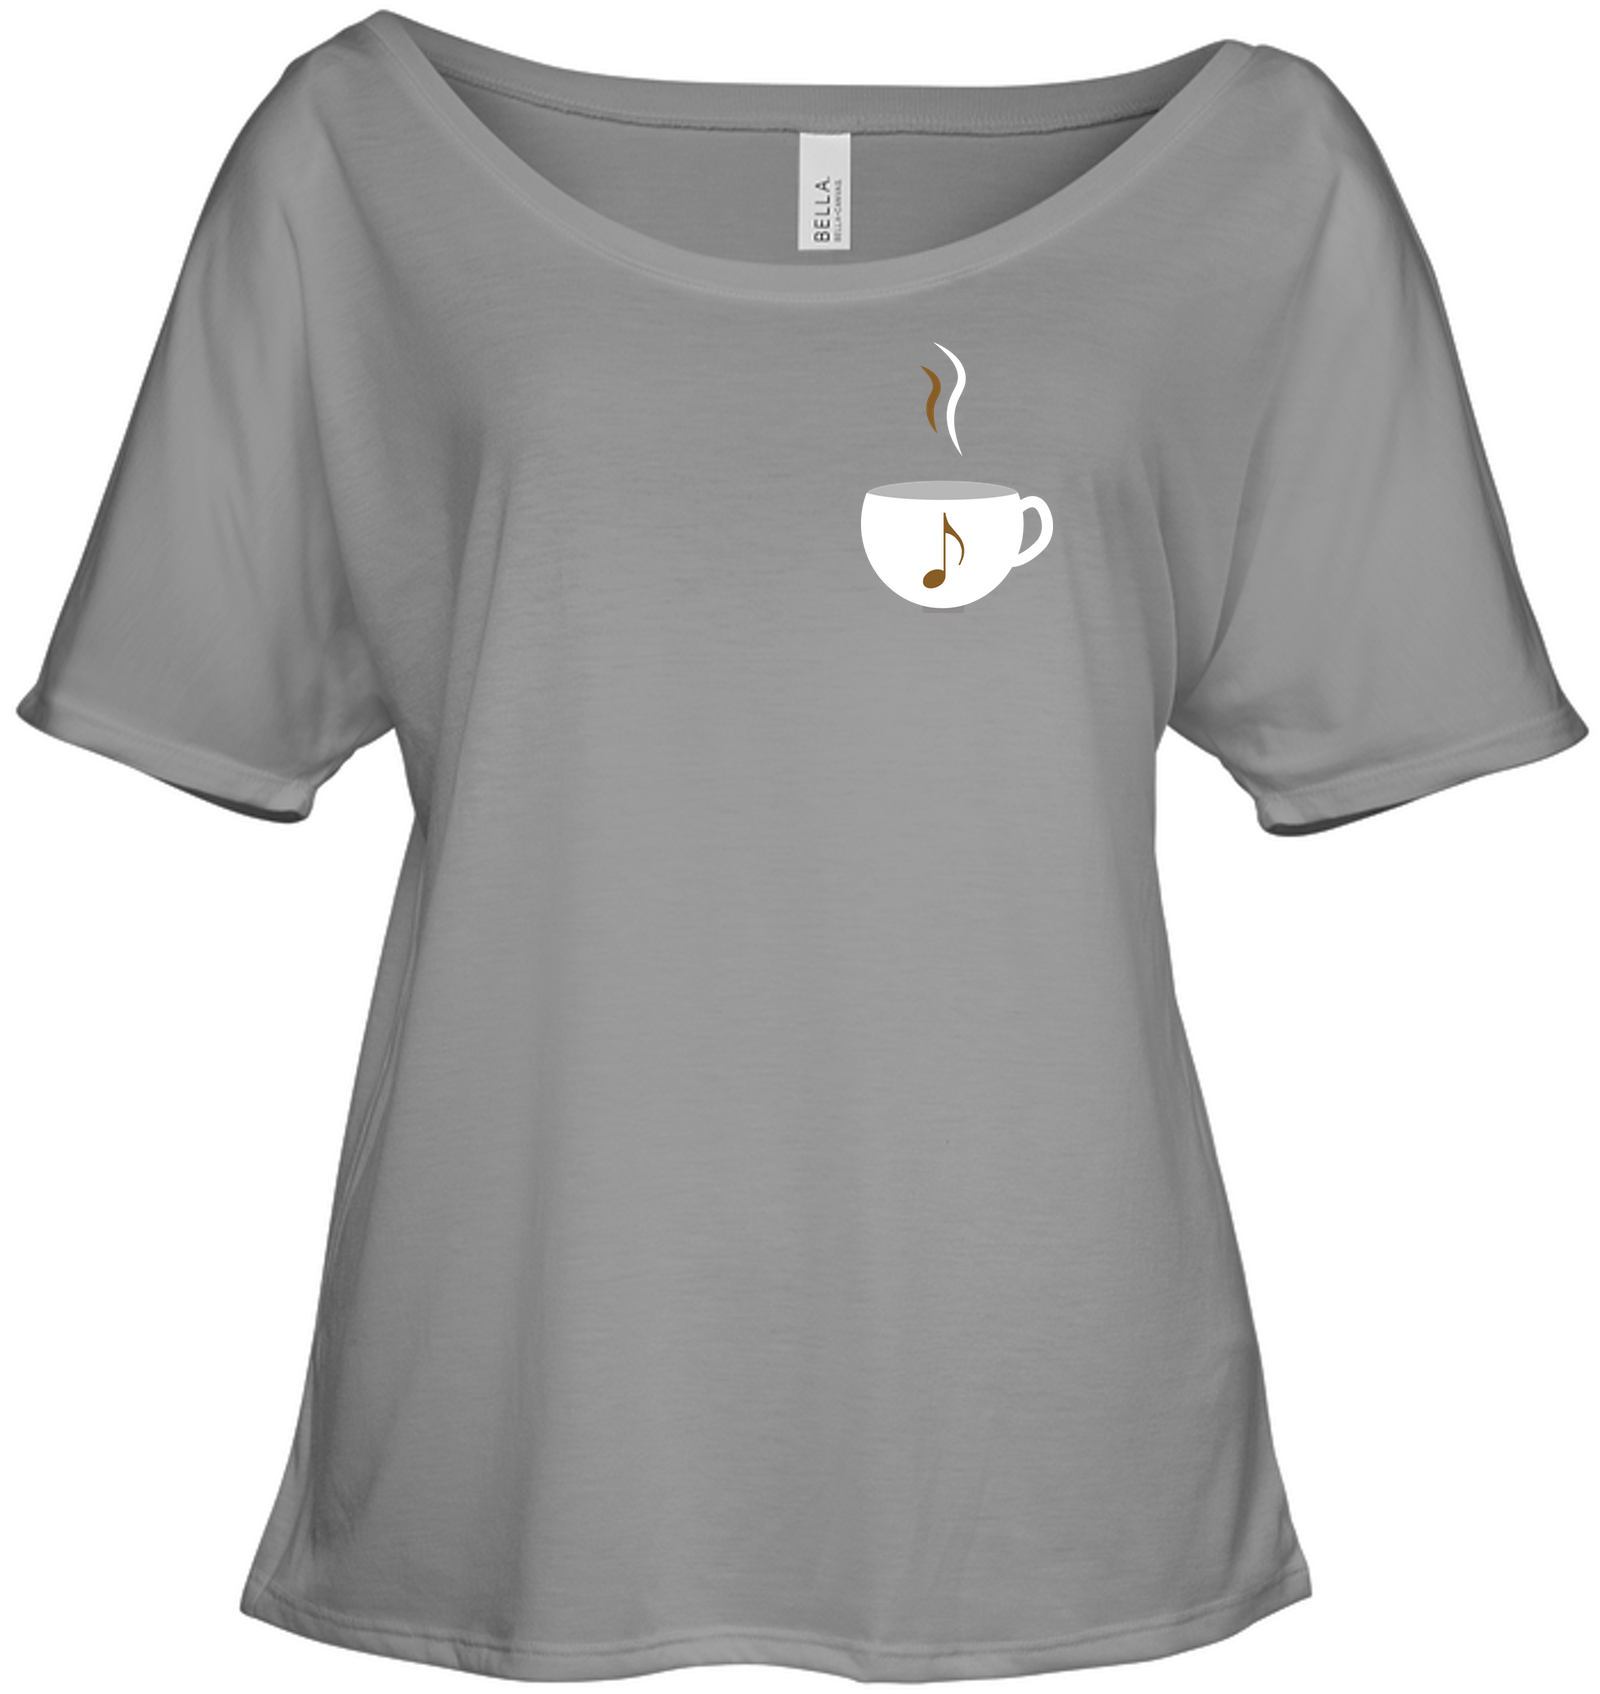 I Love Coffee with a splash of music (Pocket Size) - Bella + Canvas Women's Slouchy Tee